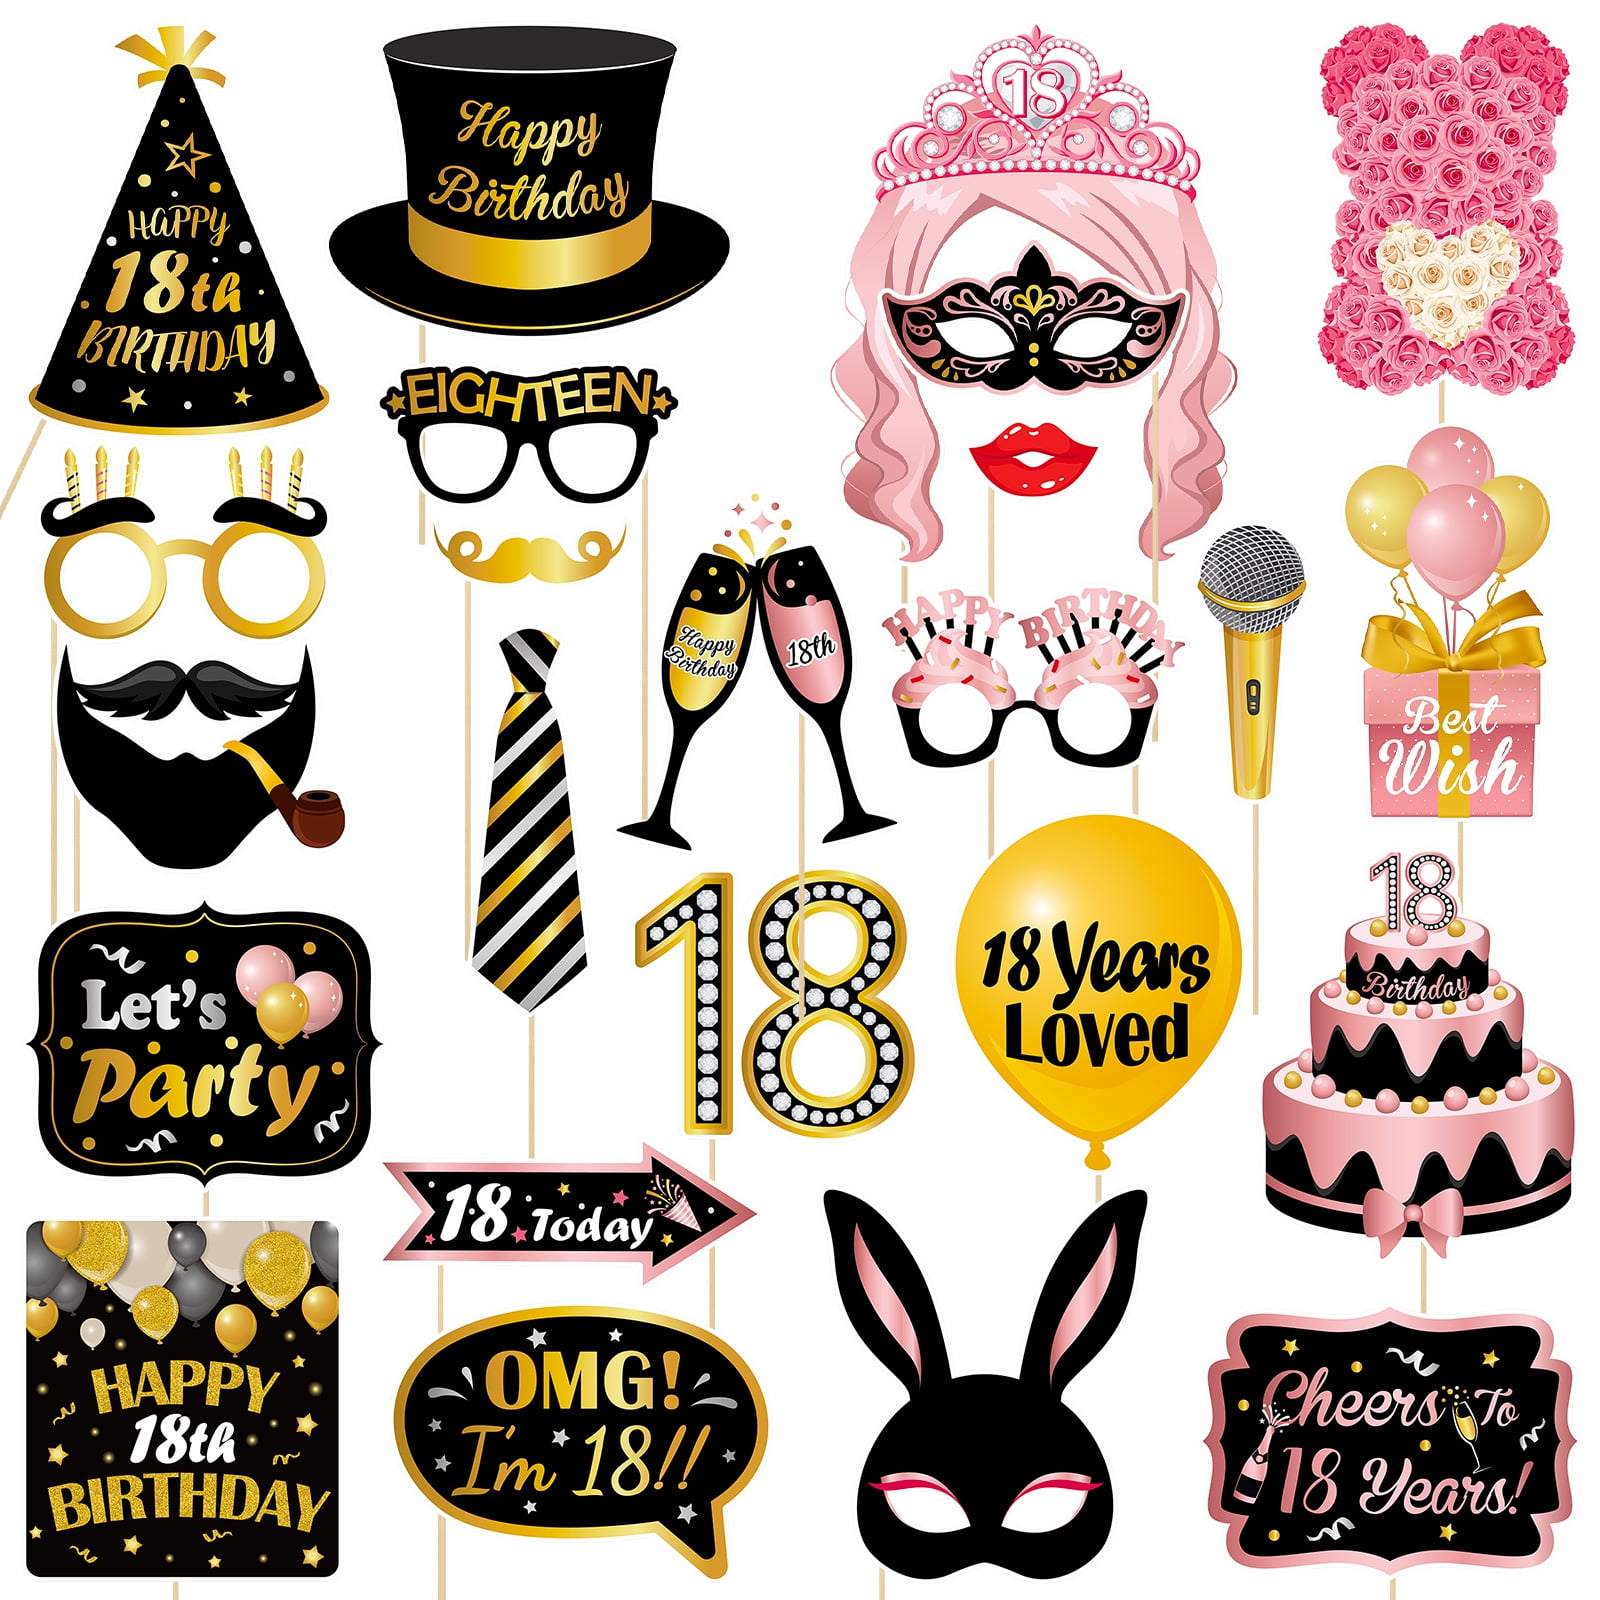 Birthday Photo Booth Props,24PCS Hand-painted pattern Birthday Selfie Props Party Props Birthday Decorations Party Photo Props for men women